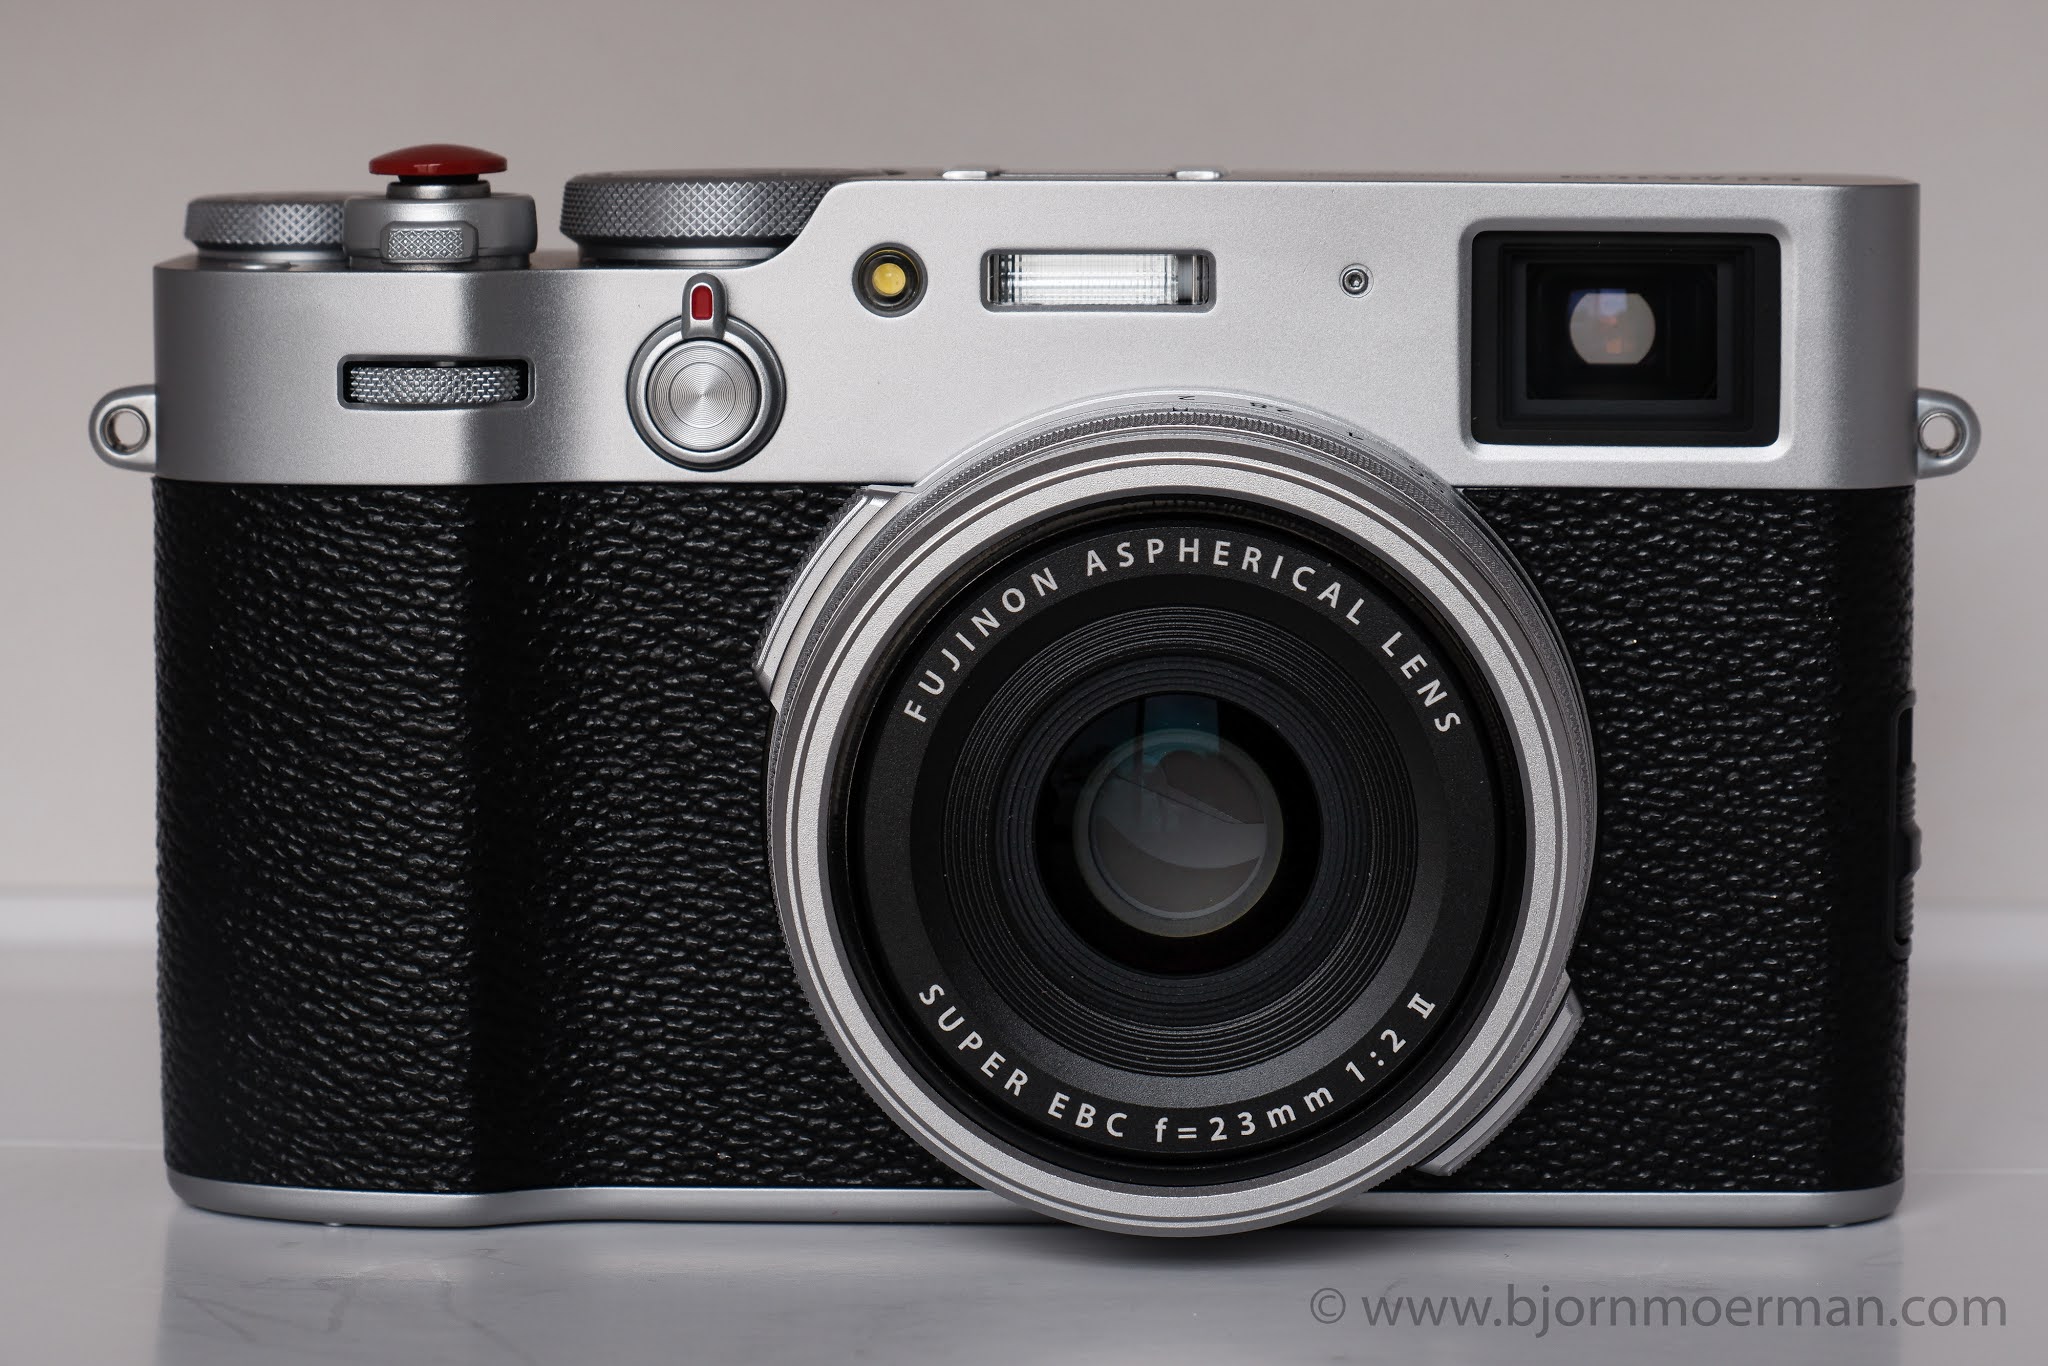 The X100 Series: What Makes It So Special? – FUJILOVE MAGAZINE